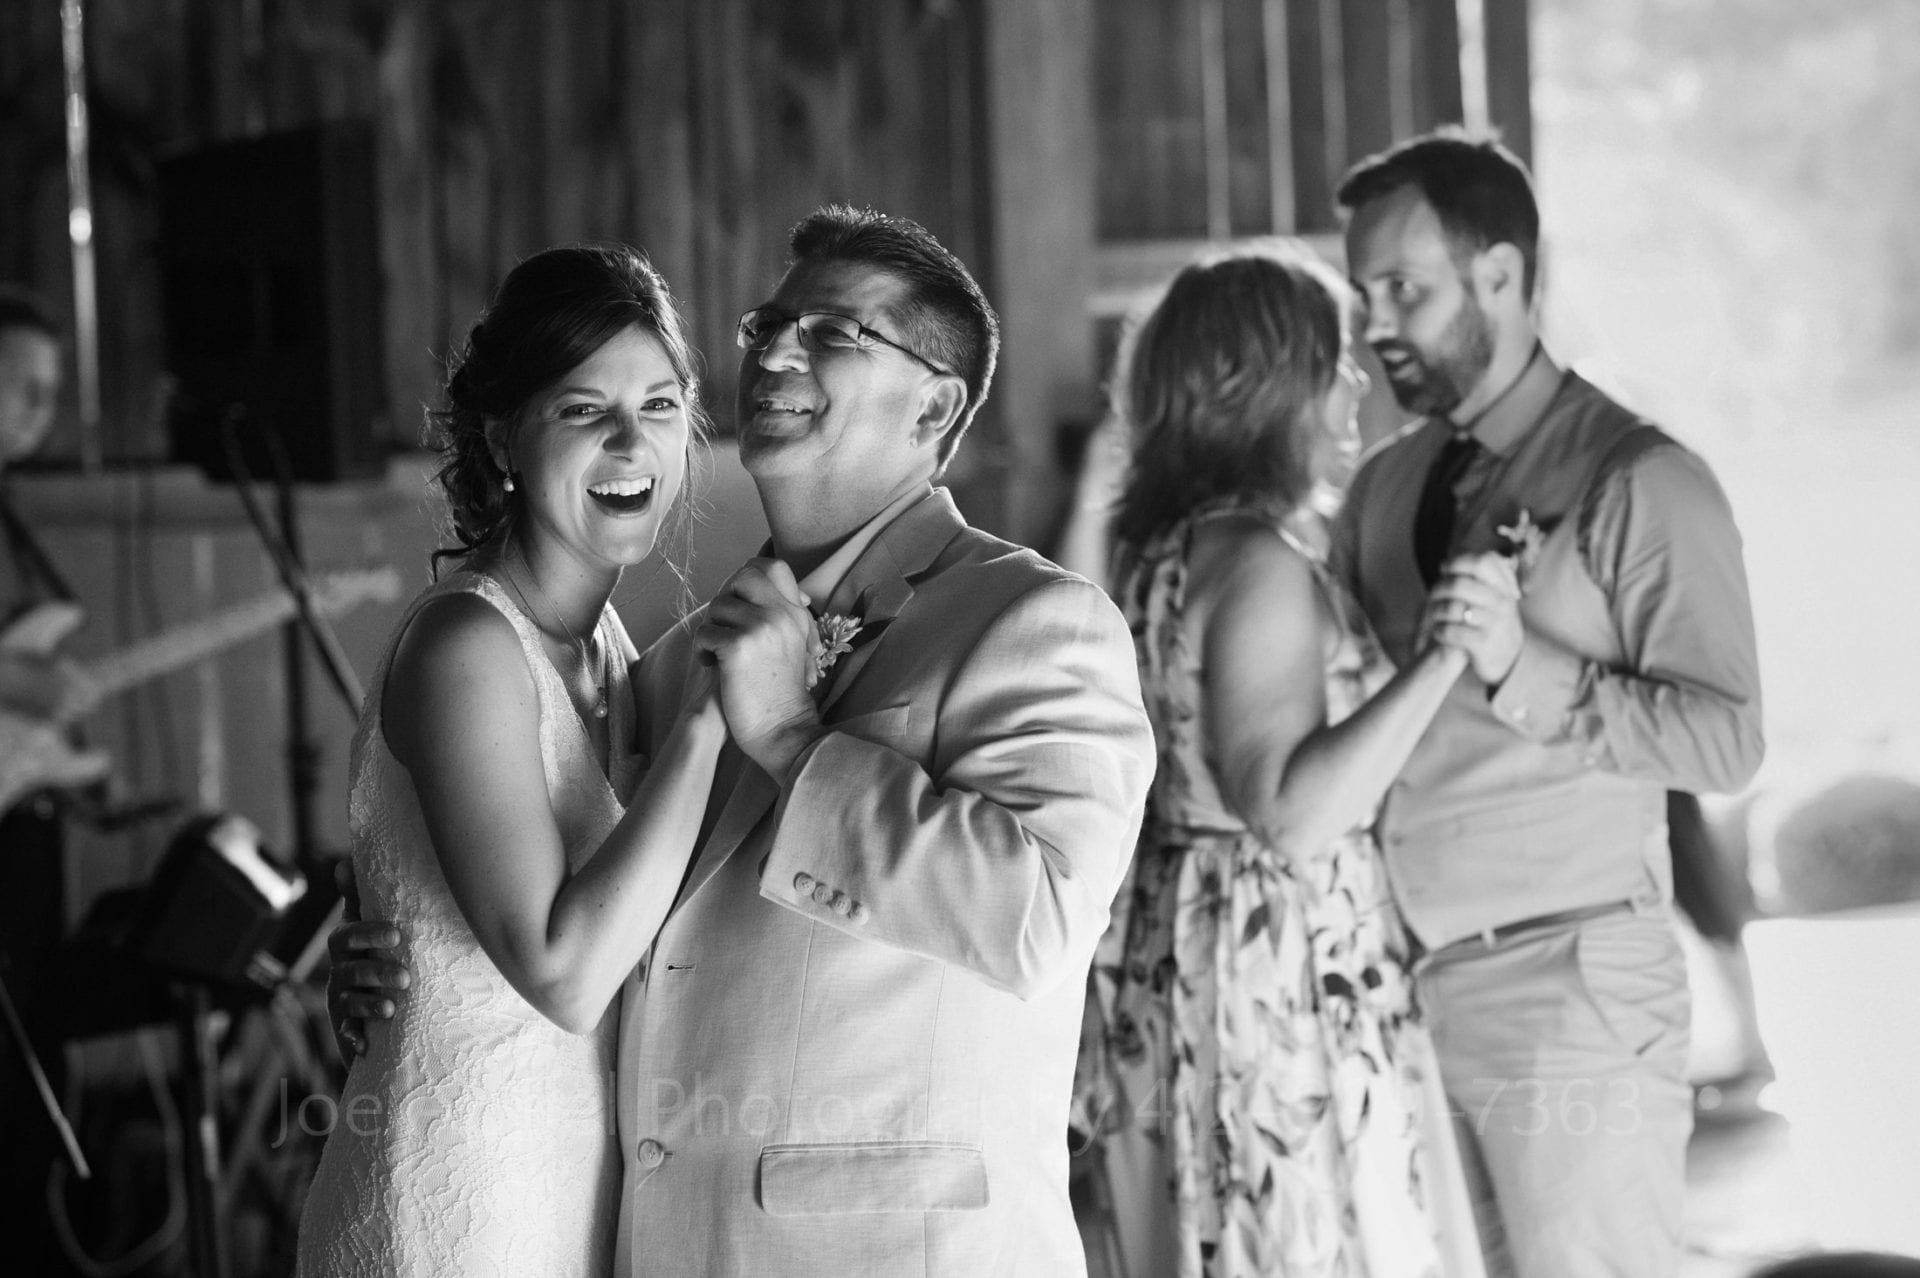 Bride dances with her father - both of them smiling. In the background the groom dances with his mom.